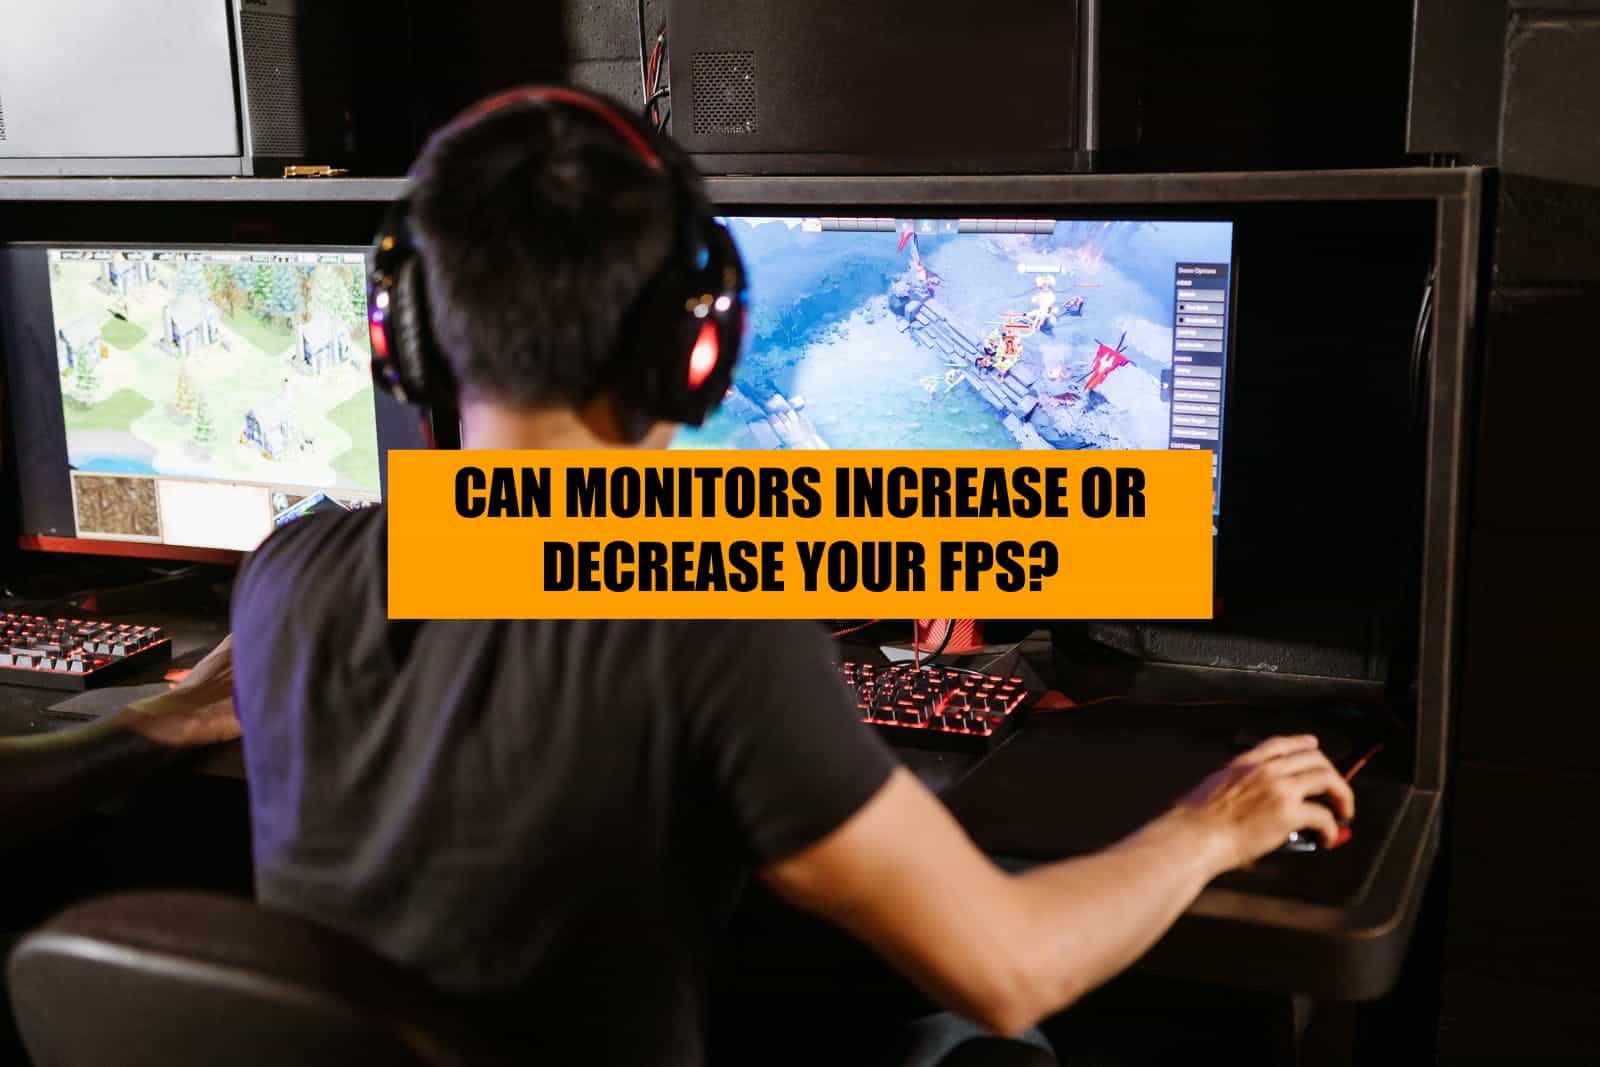 can monitors increase or decrease your fps - explained